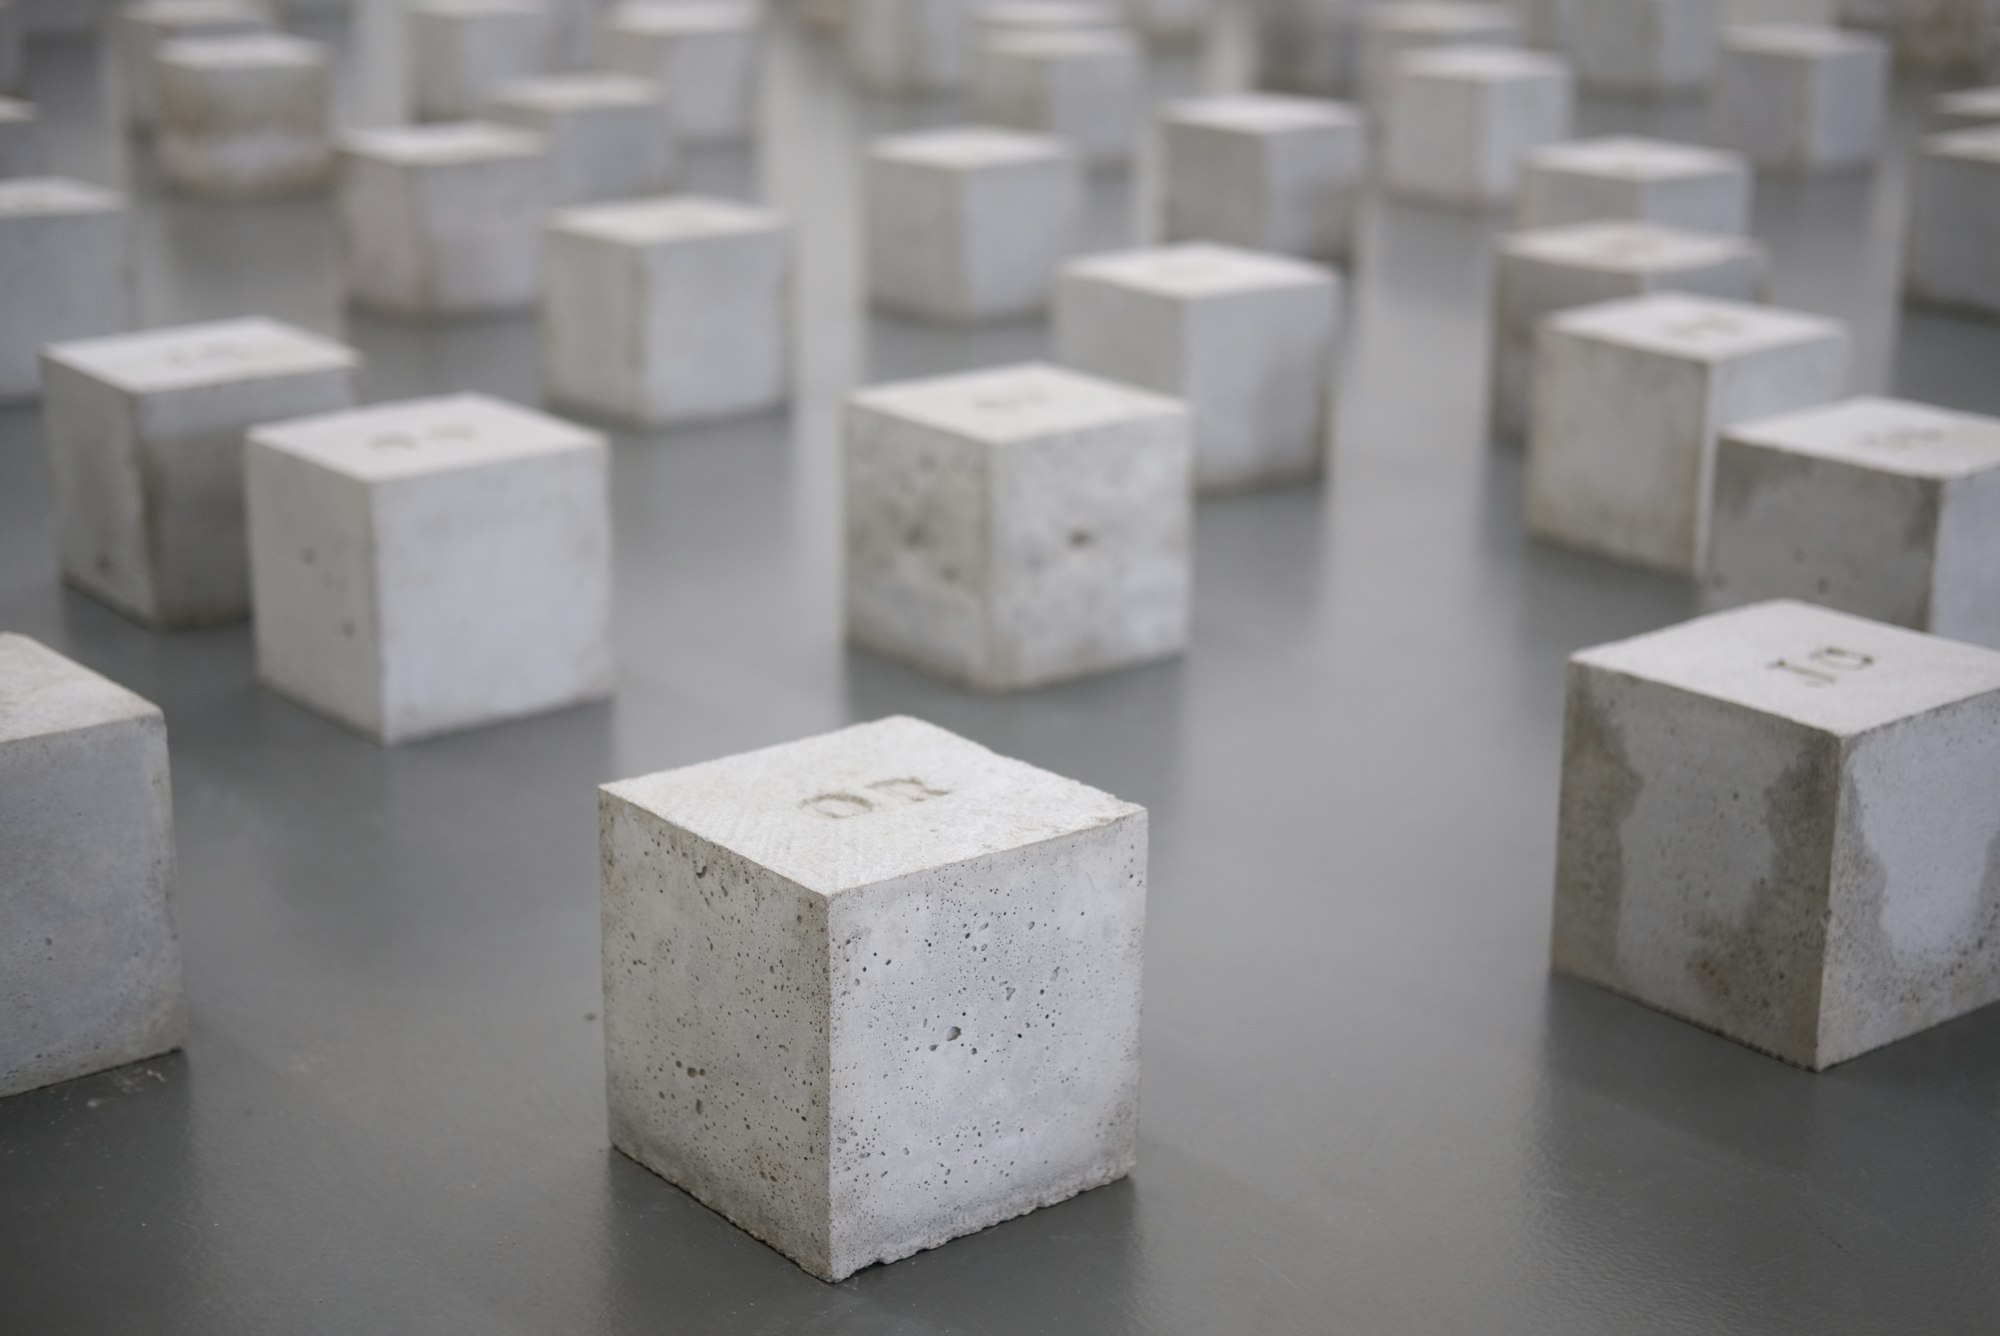 A series of identical white cubes, seemingly made from concrete or a similar material.